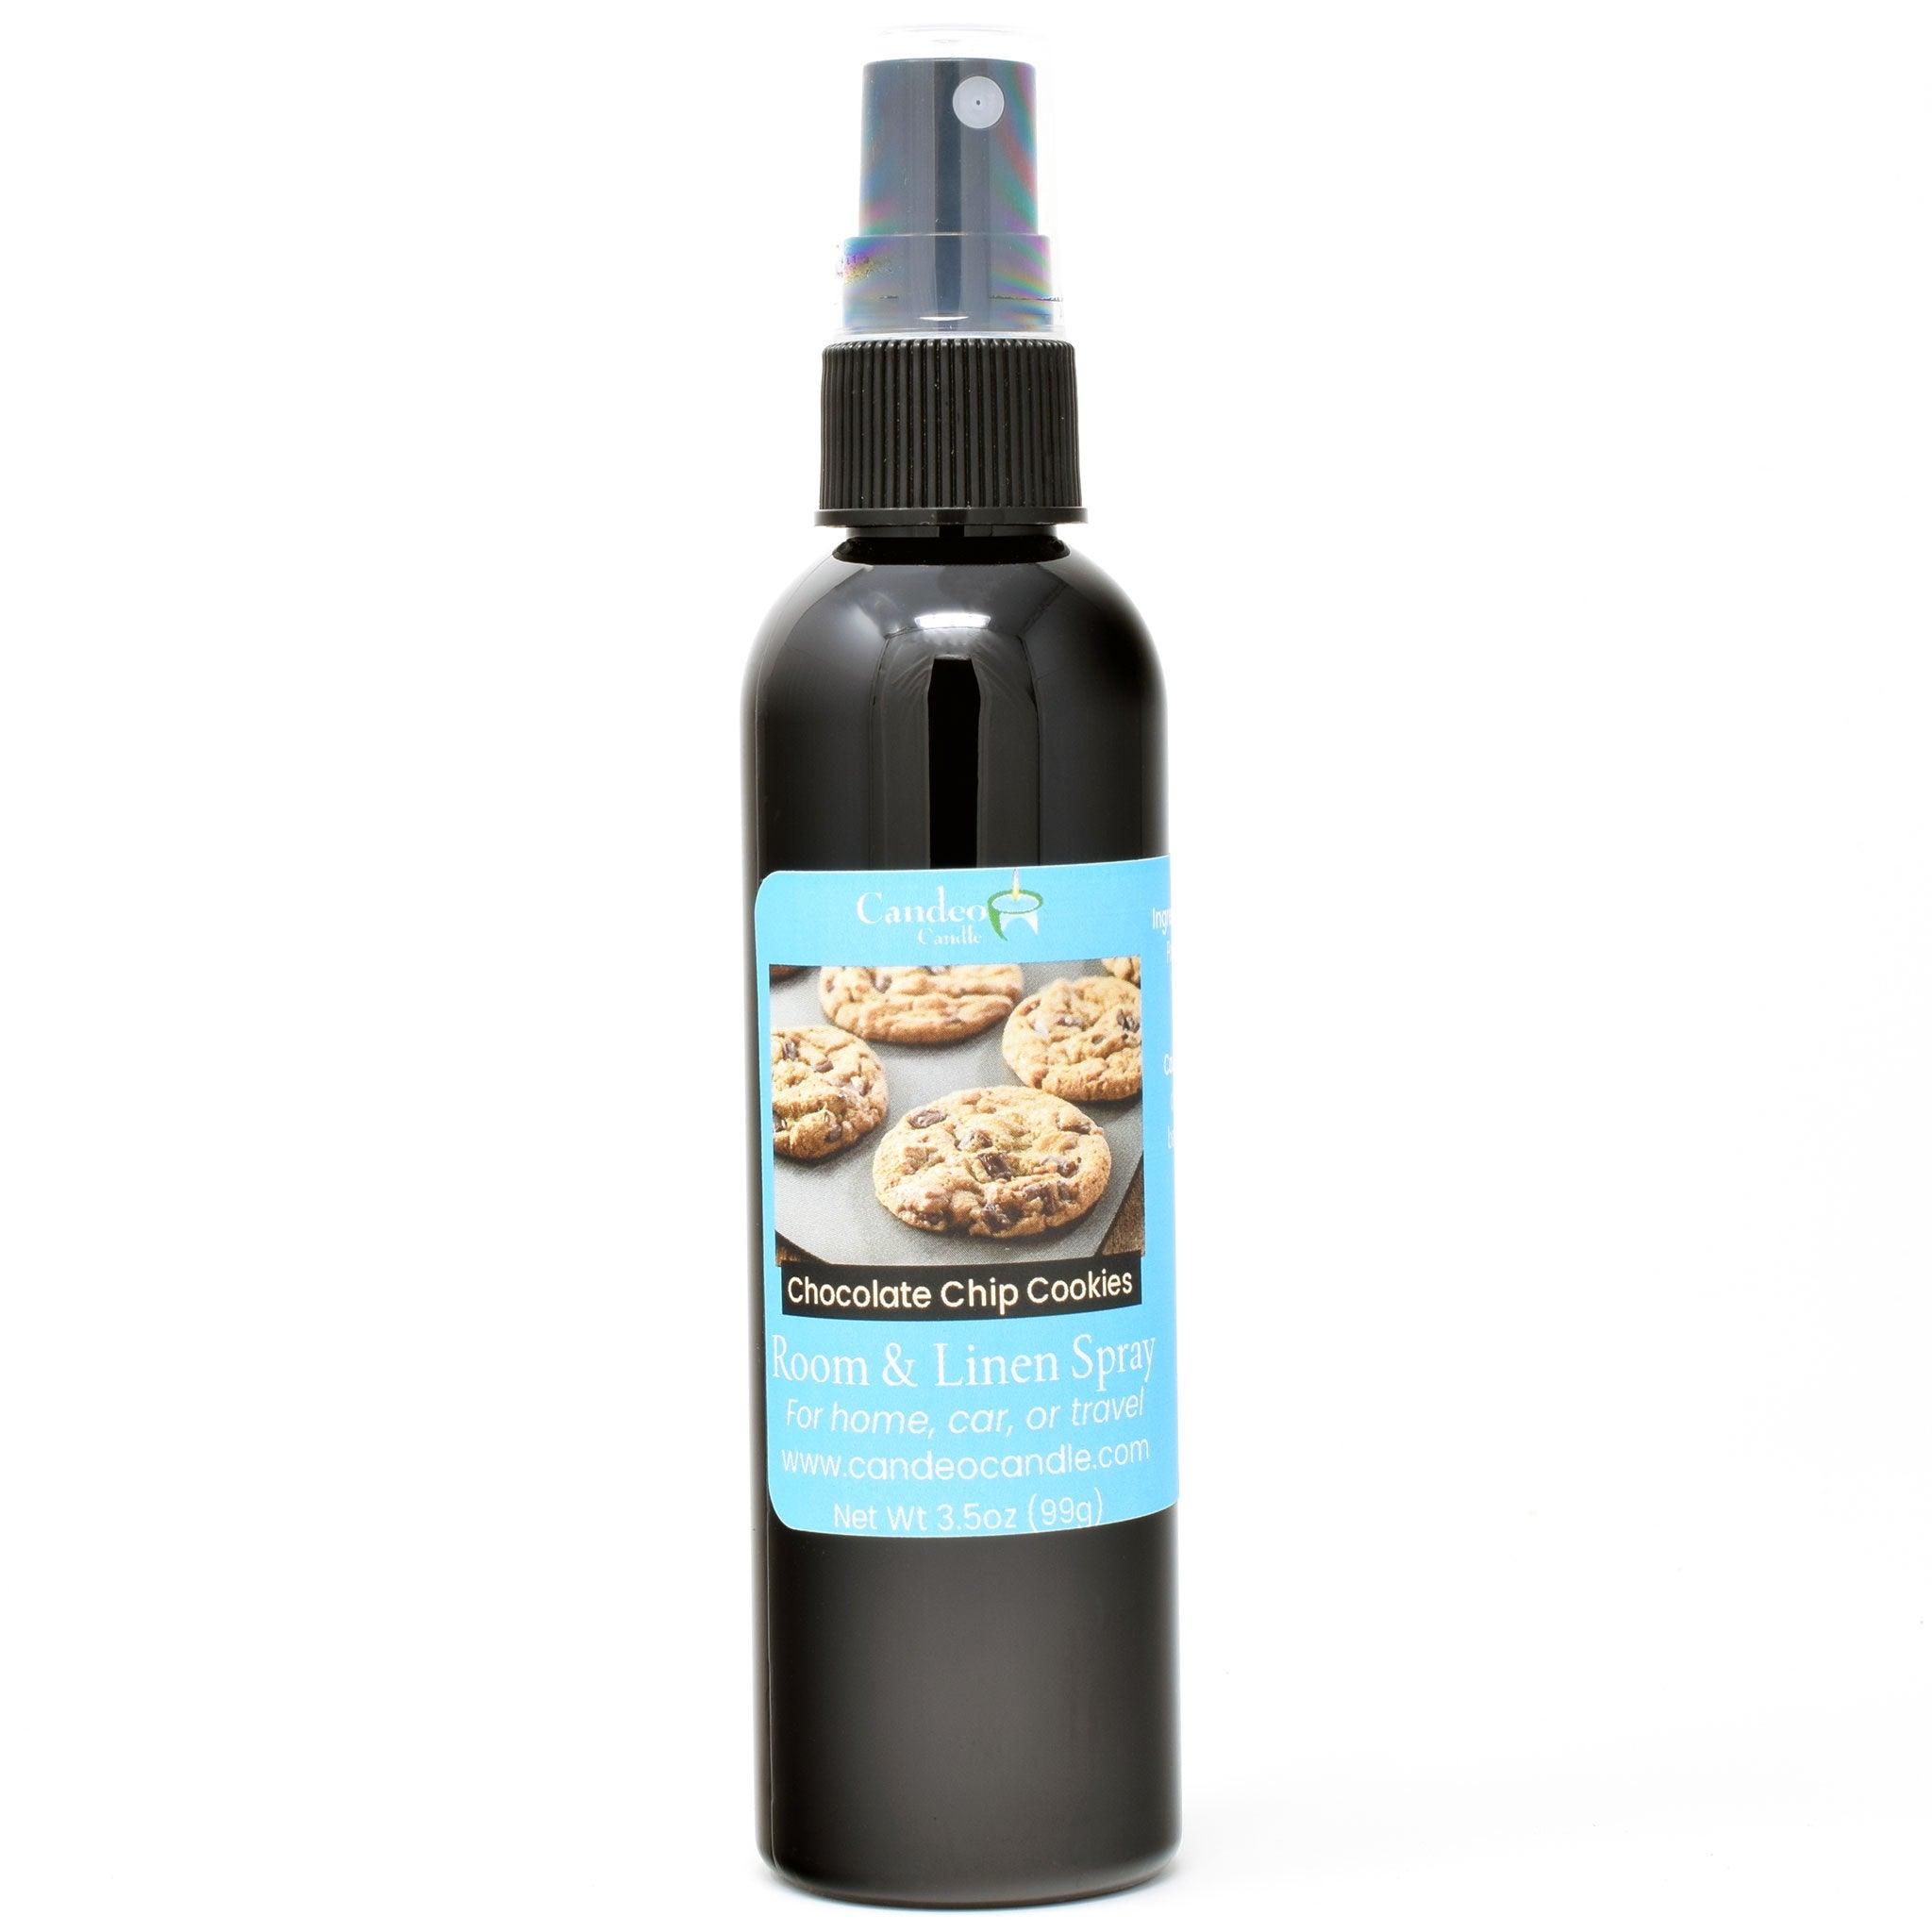 Chocolate Chip Cookies, 3.5 oz Room Spray - Candeo Candle